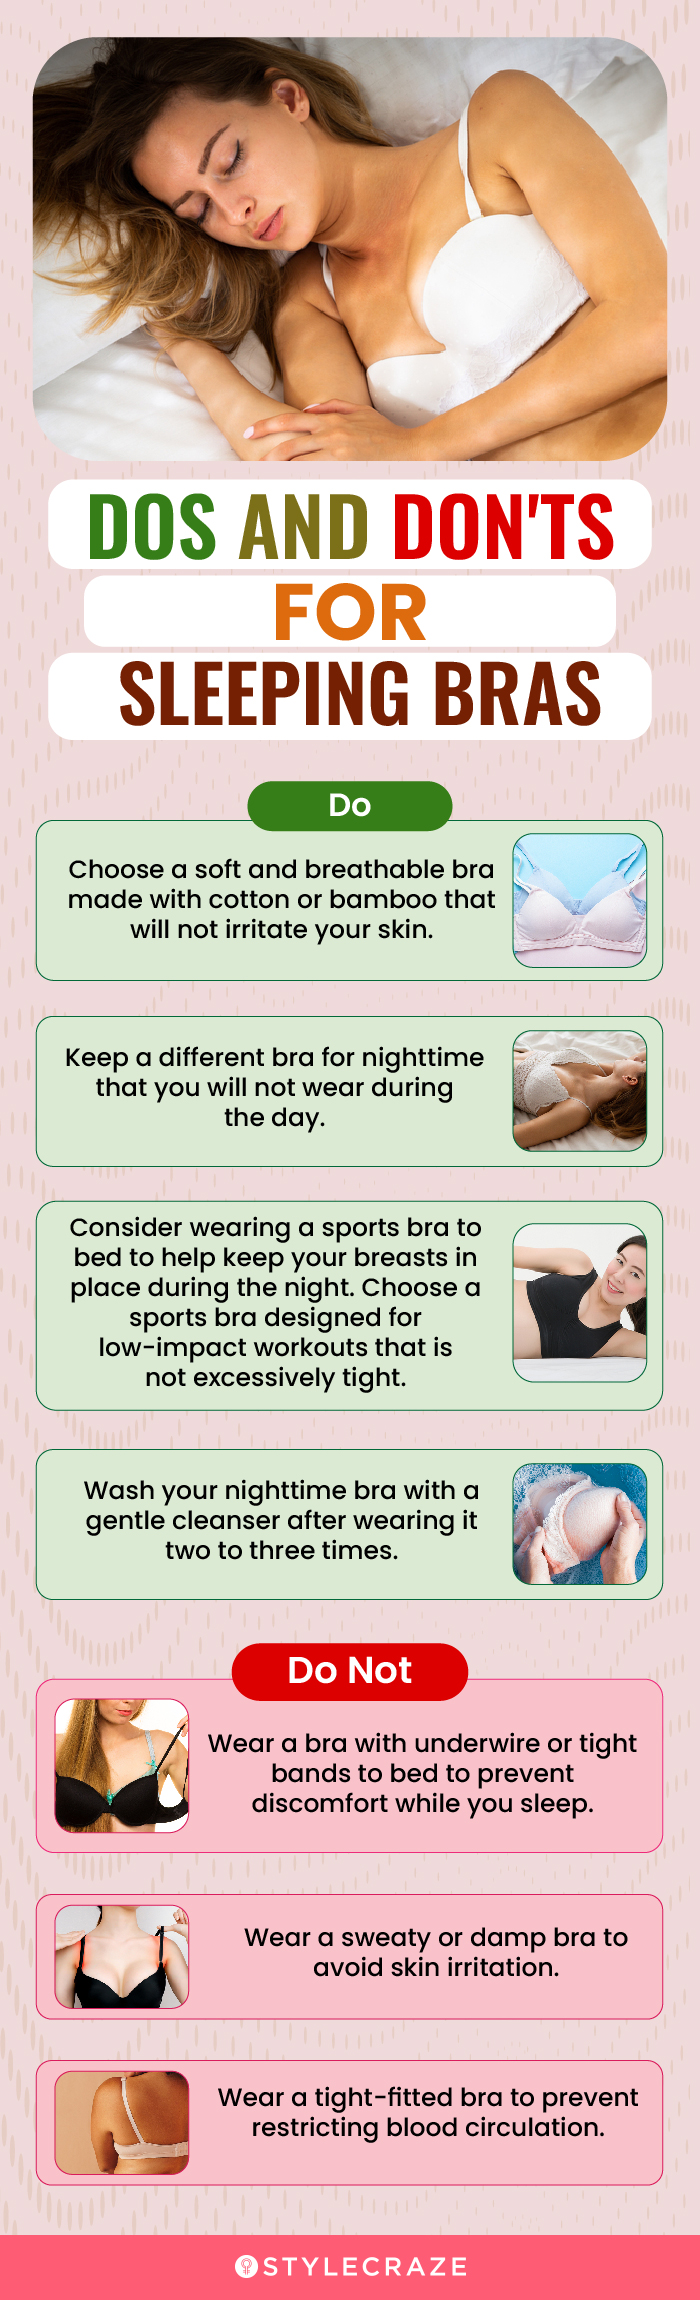 DOs and DON'Ts Of Choosing & Maintaining Sleeping Bras (infographic)